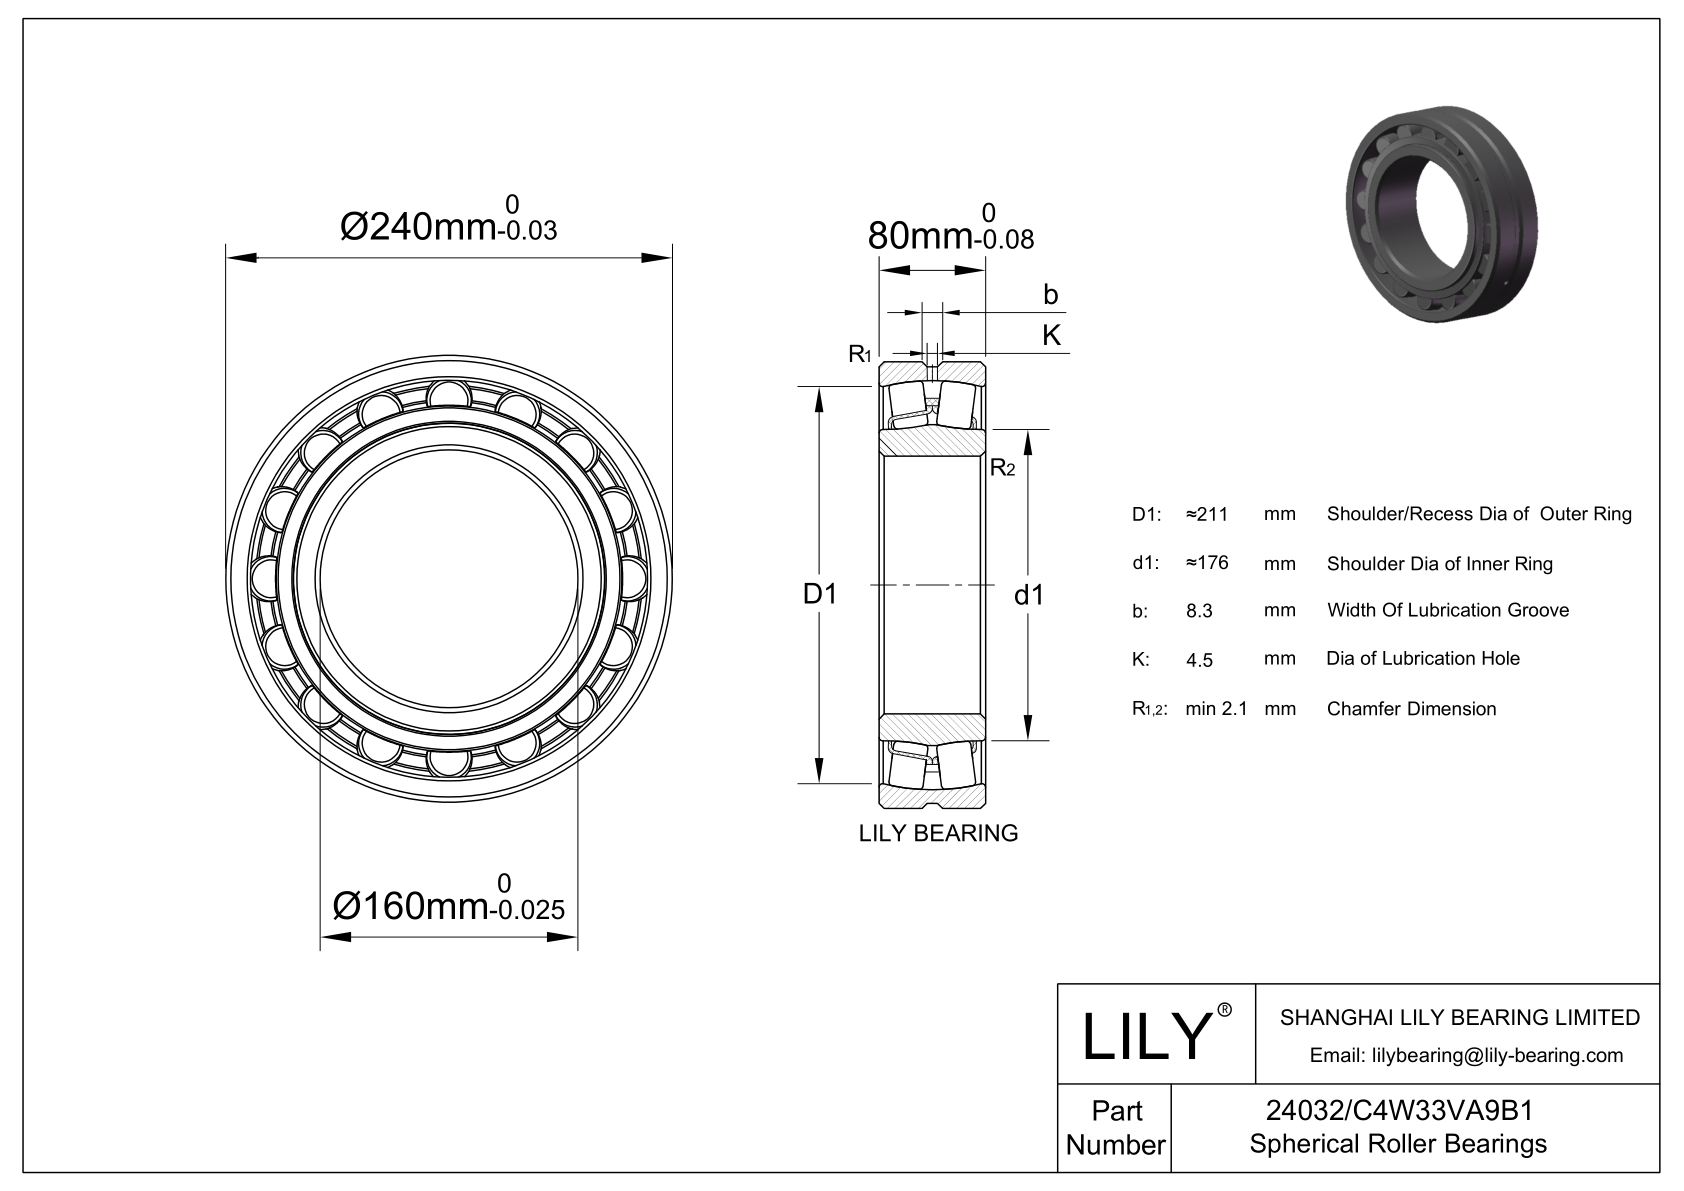 24032/C4W33VA9B1 Double Row Spherical Roller Bearing cad drawing